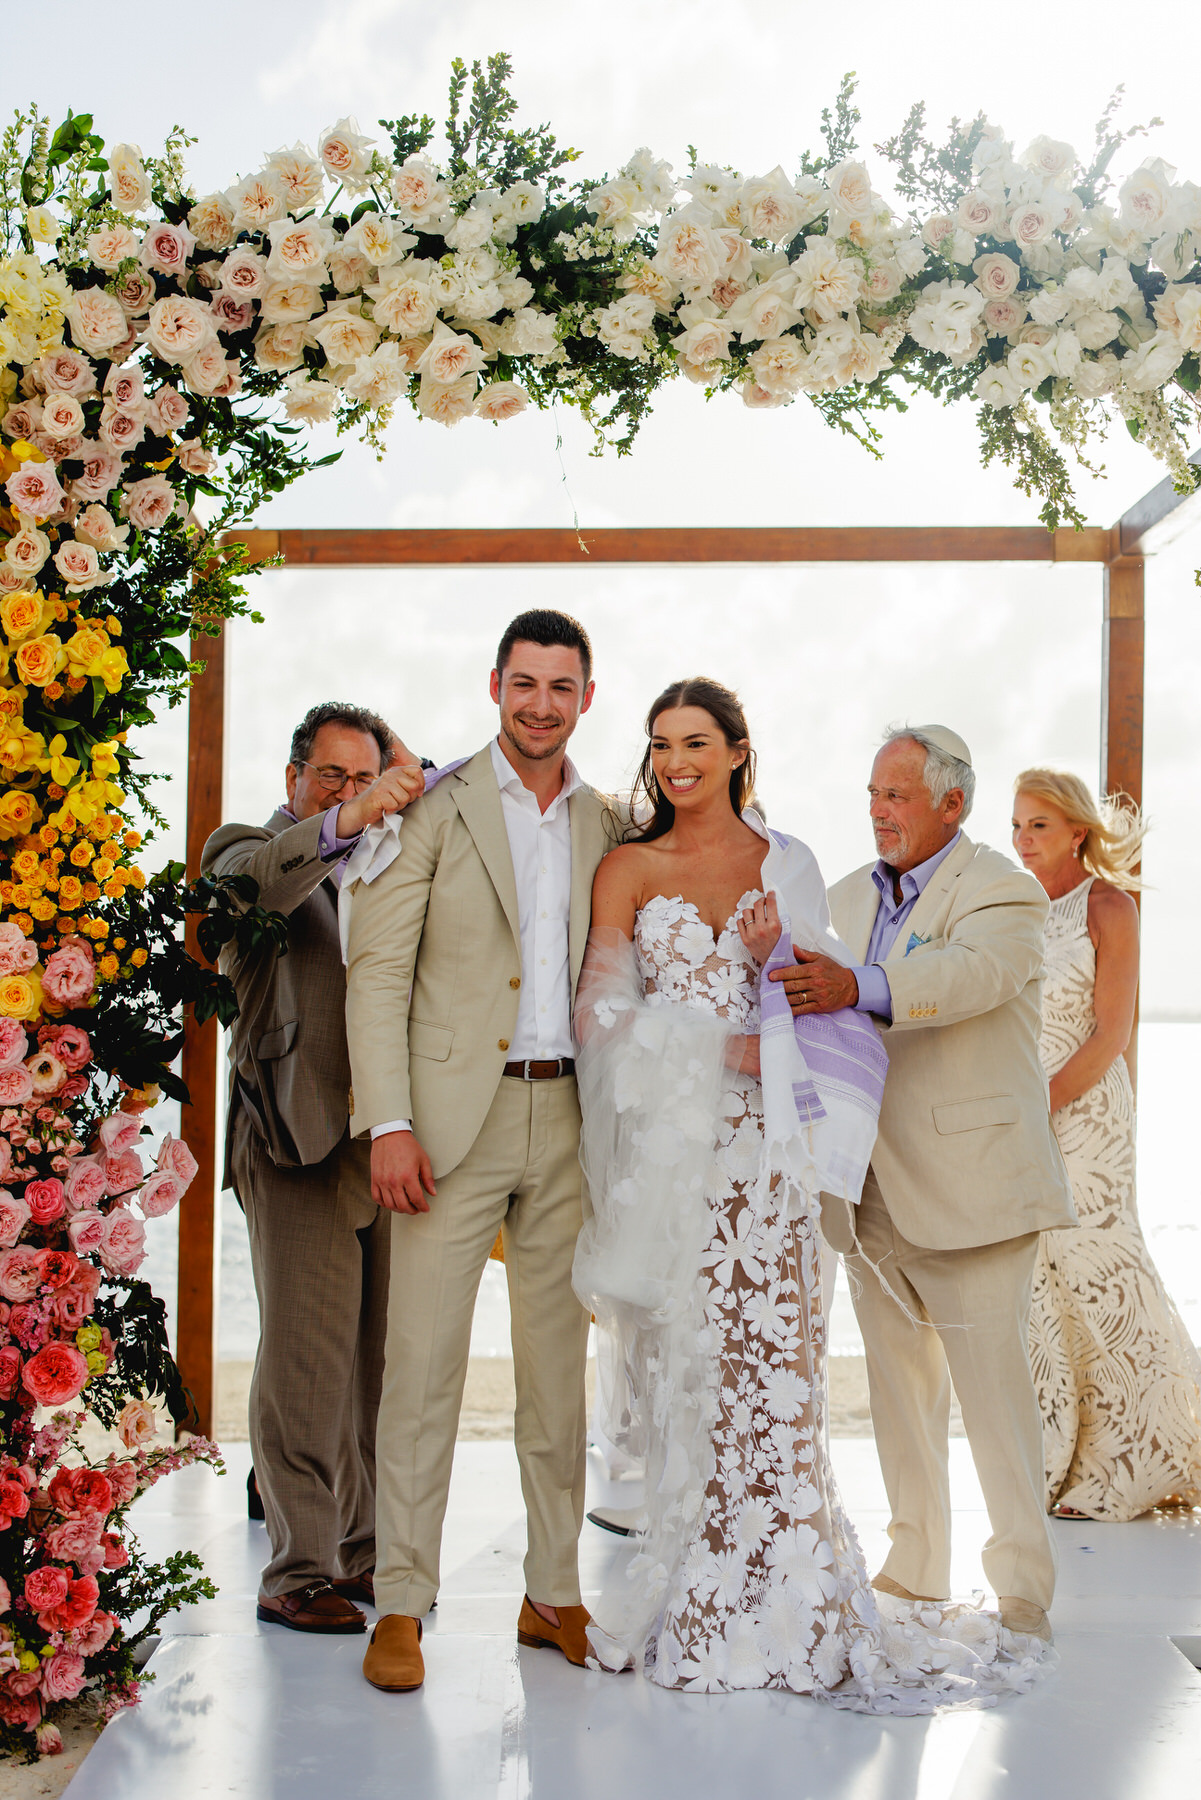 Jewish wedding ceremony at Nizuc Resort and Spa Cancun, filled with joy and tradition